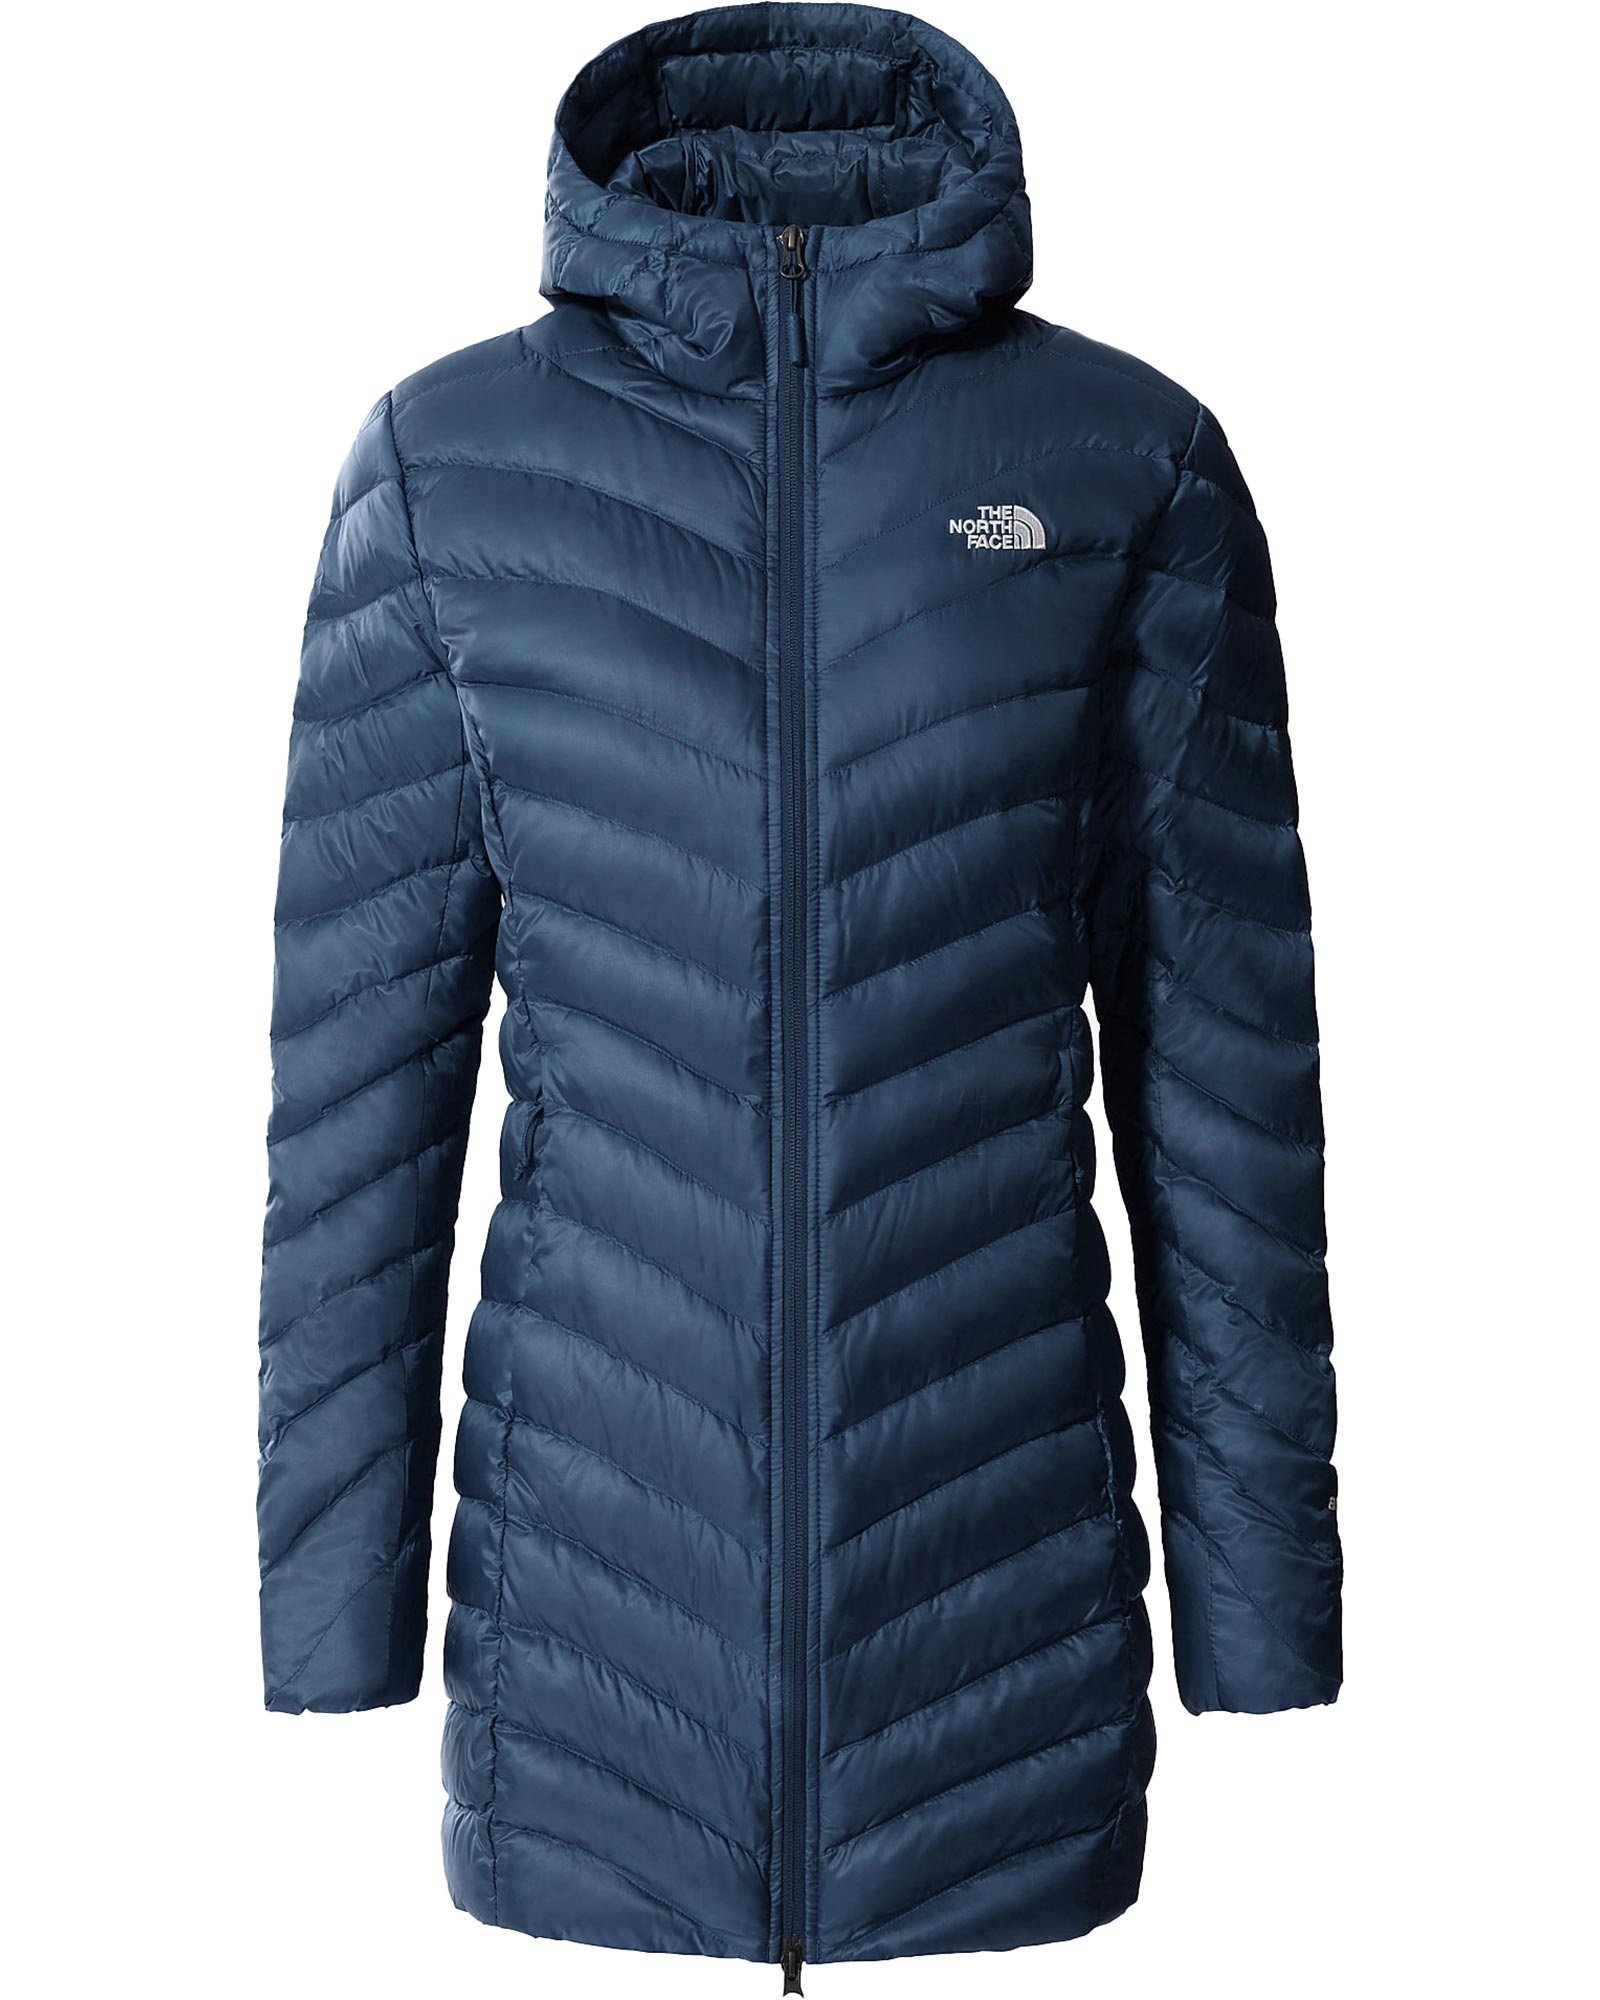 The North Face Trevail Women’s Parka Jacket - Monterey Blue S